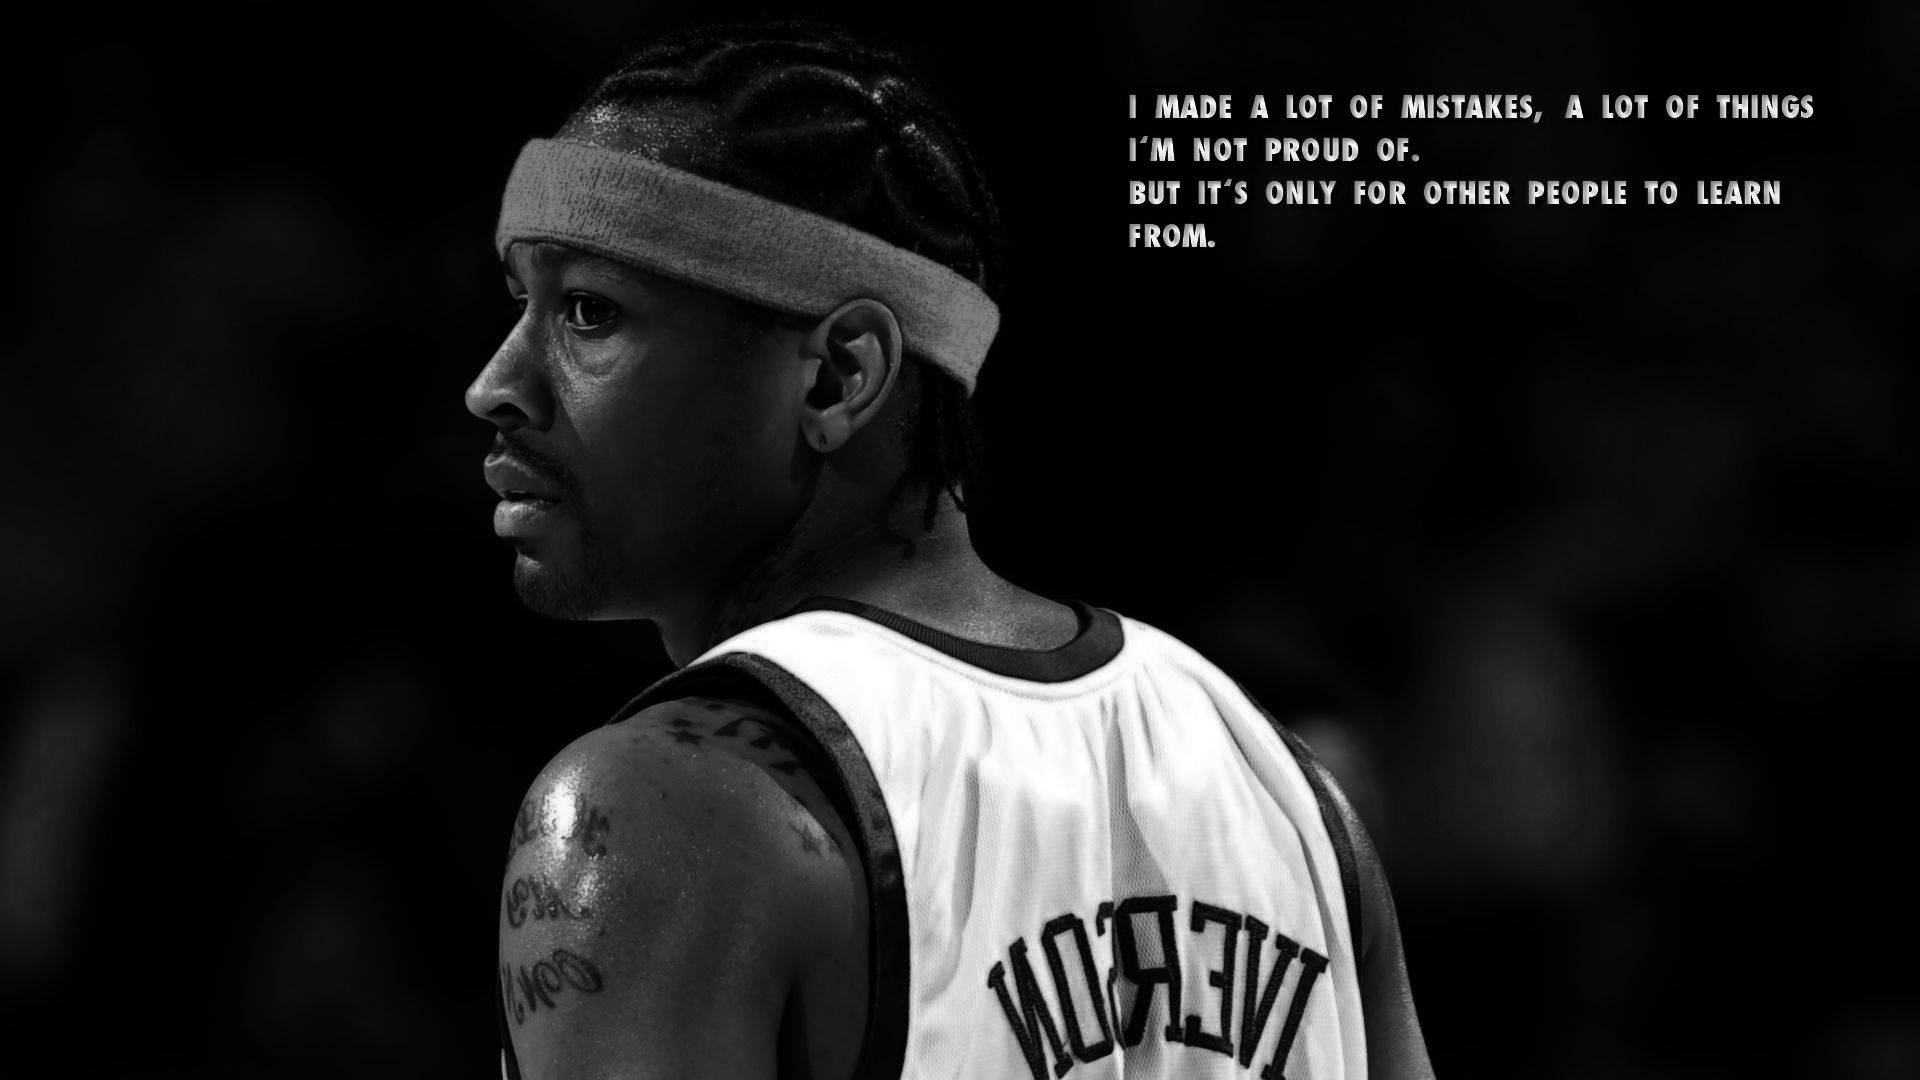 Download Allen Iverson Back With Quote Wallpaper